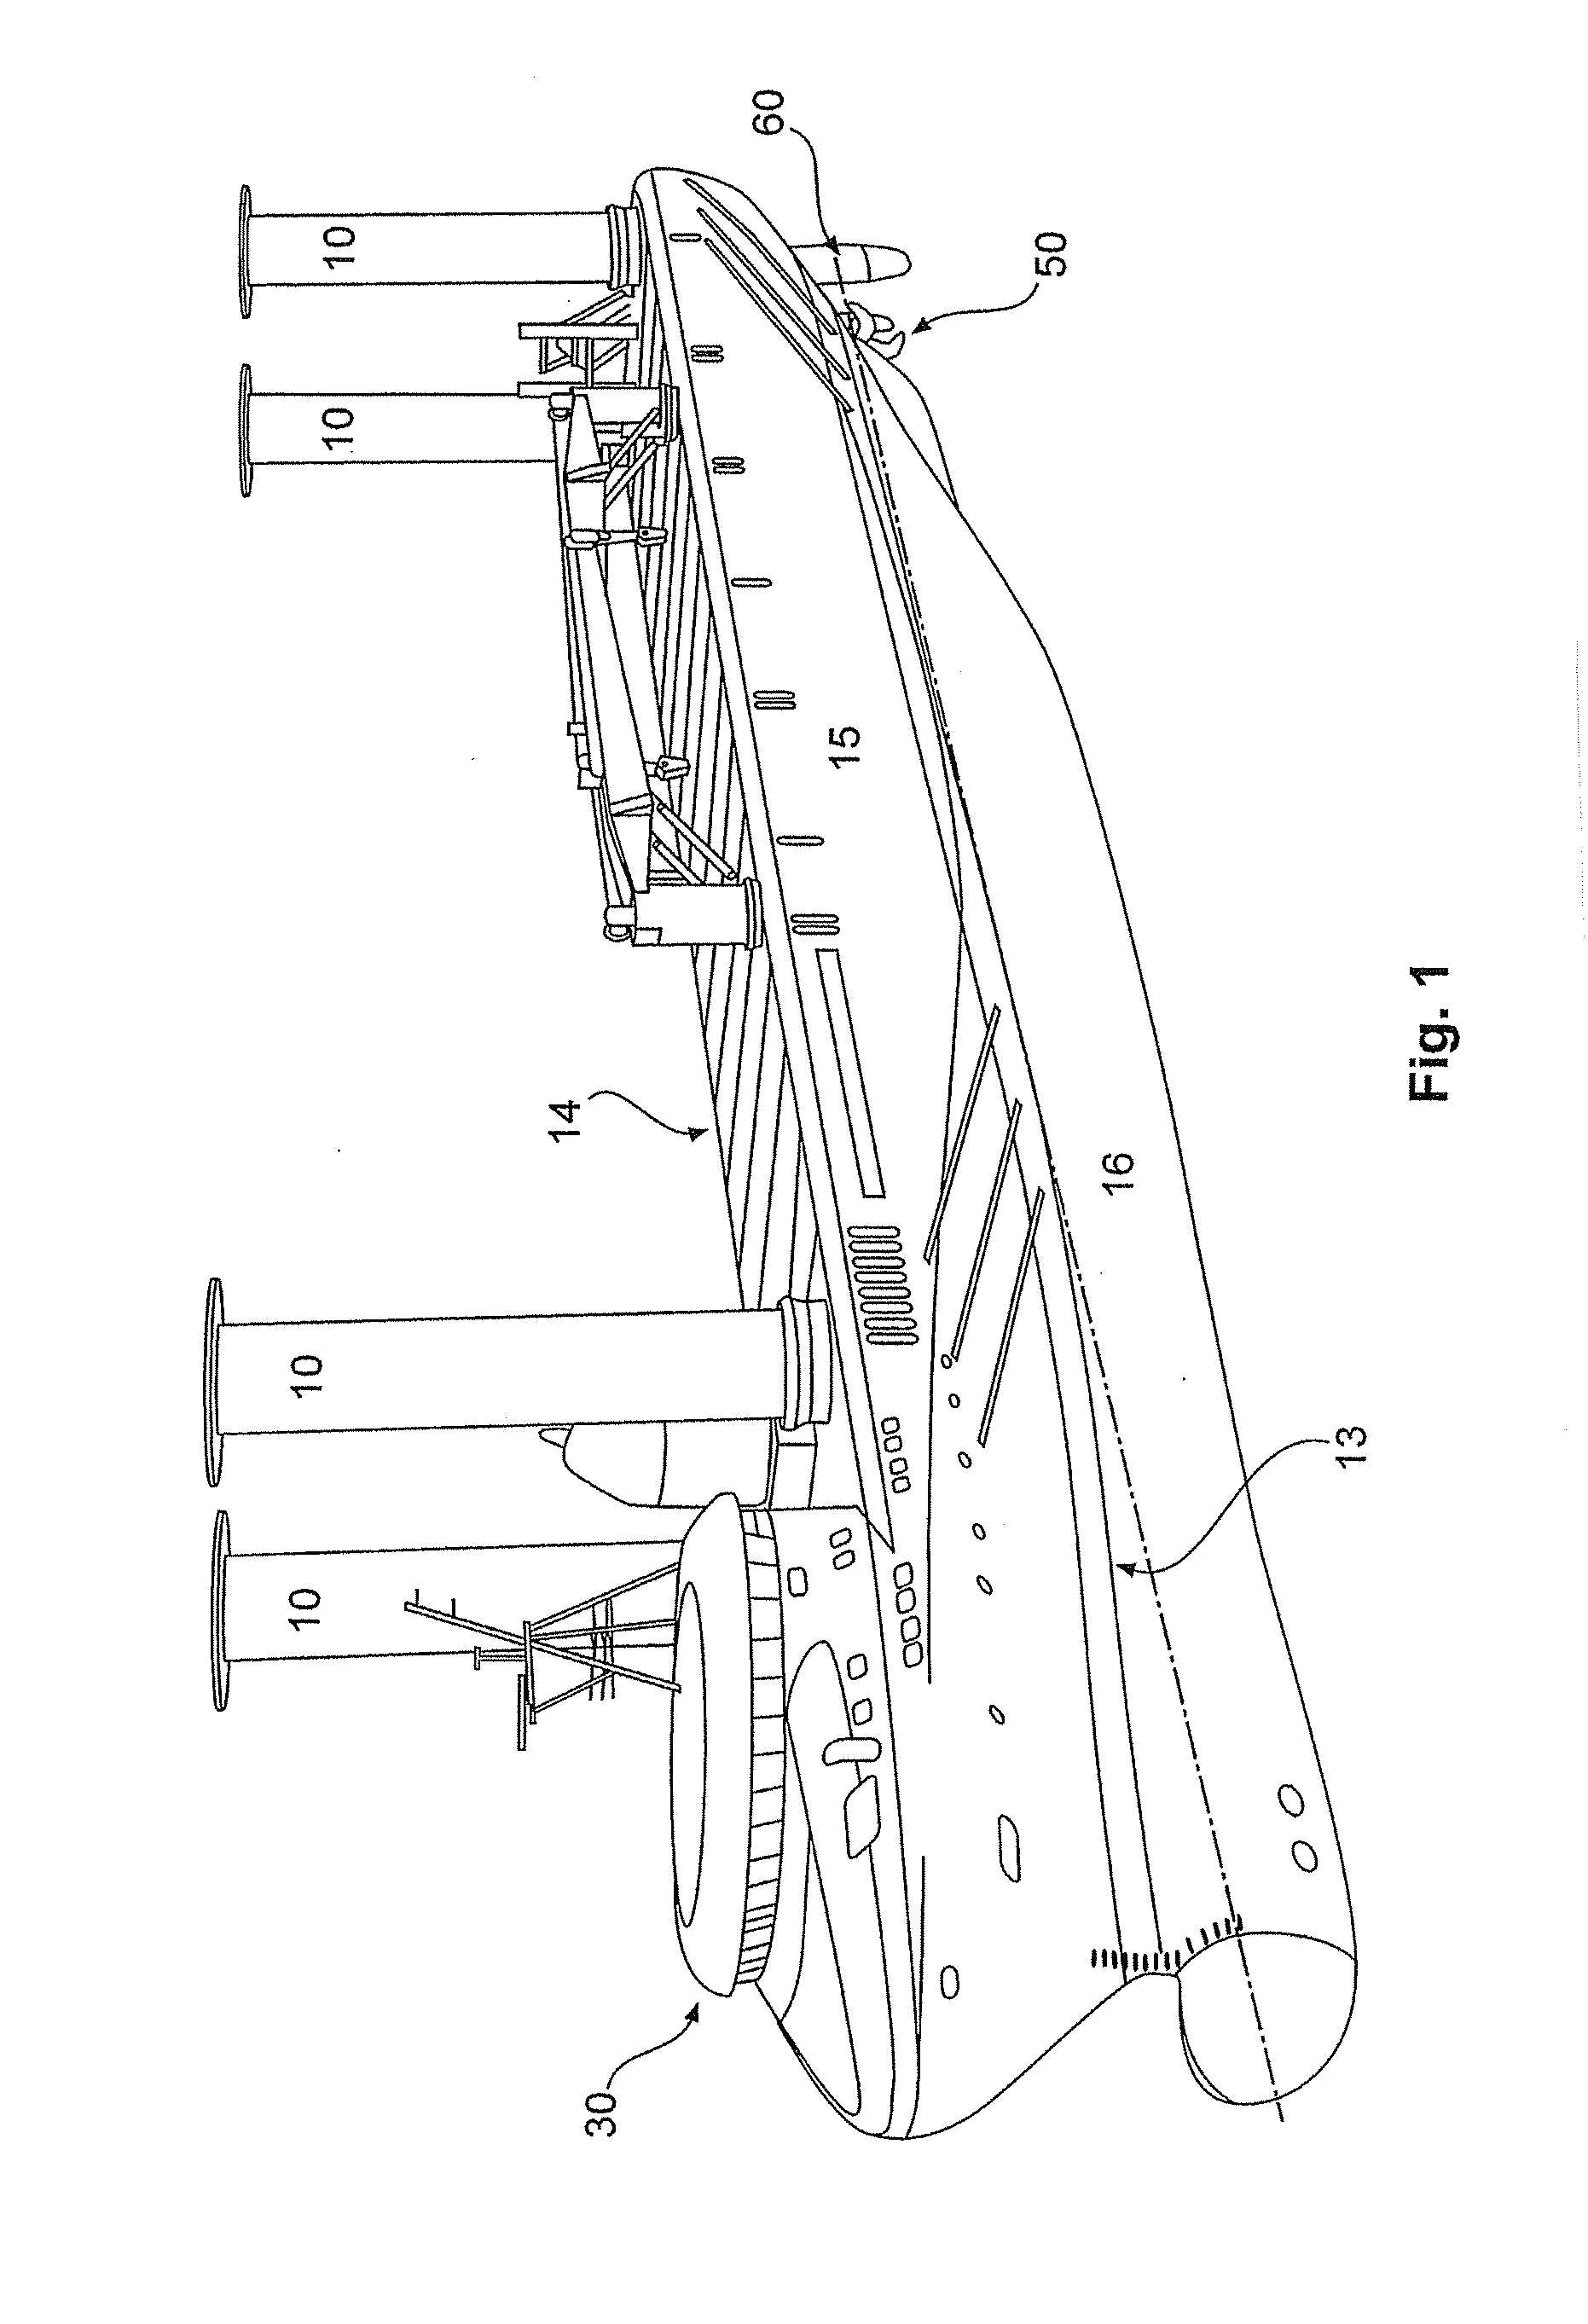 Method for operating a ship, in particular a cargo ship, with at least one magnus rotor